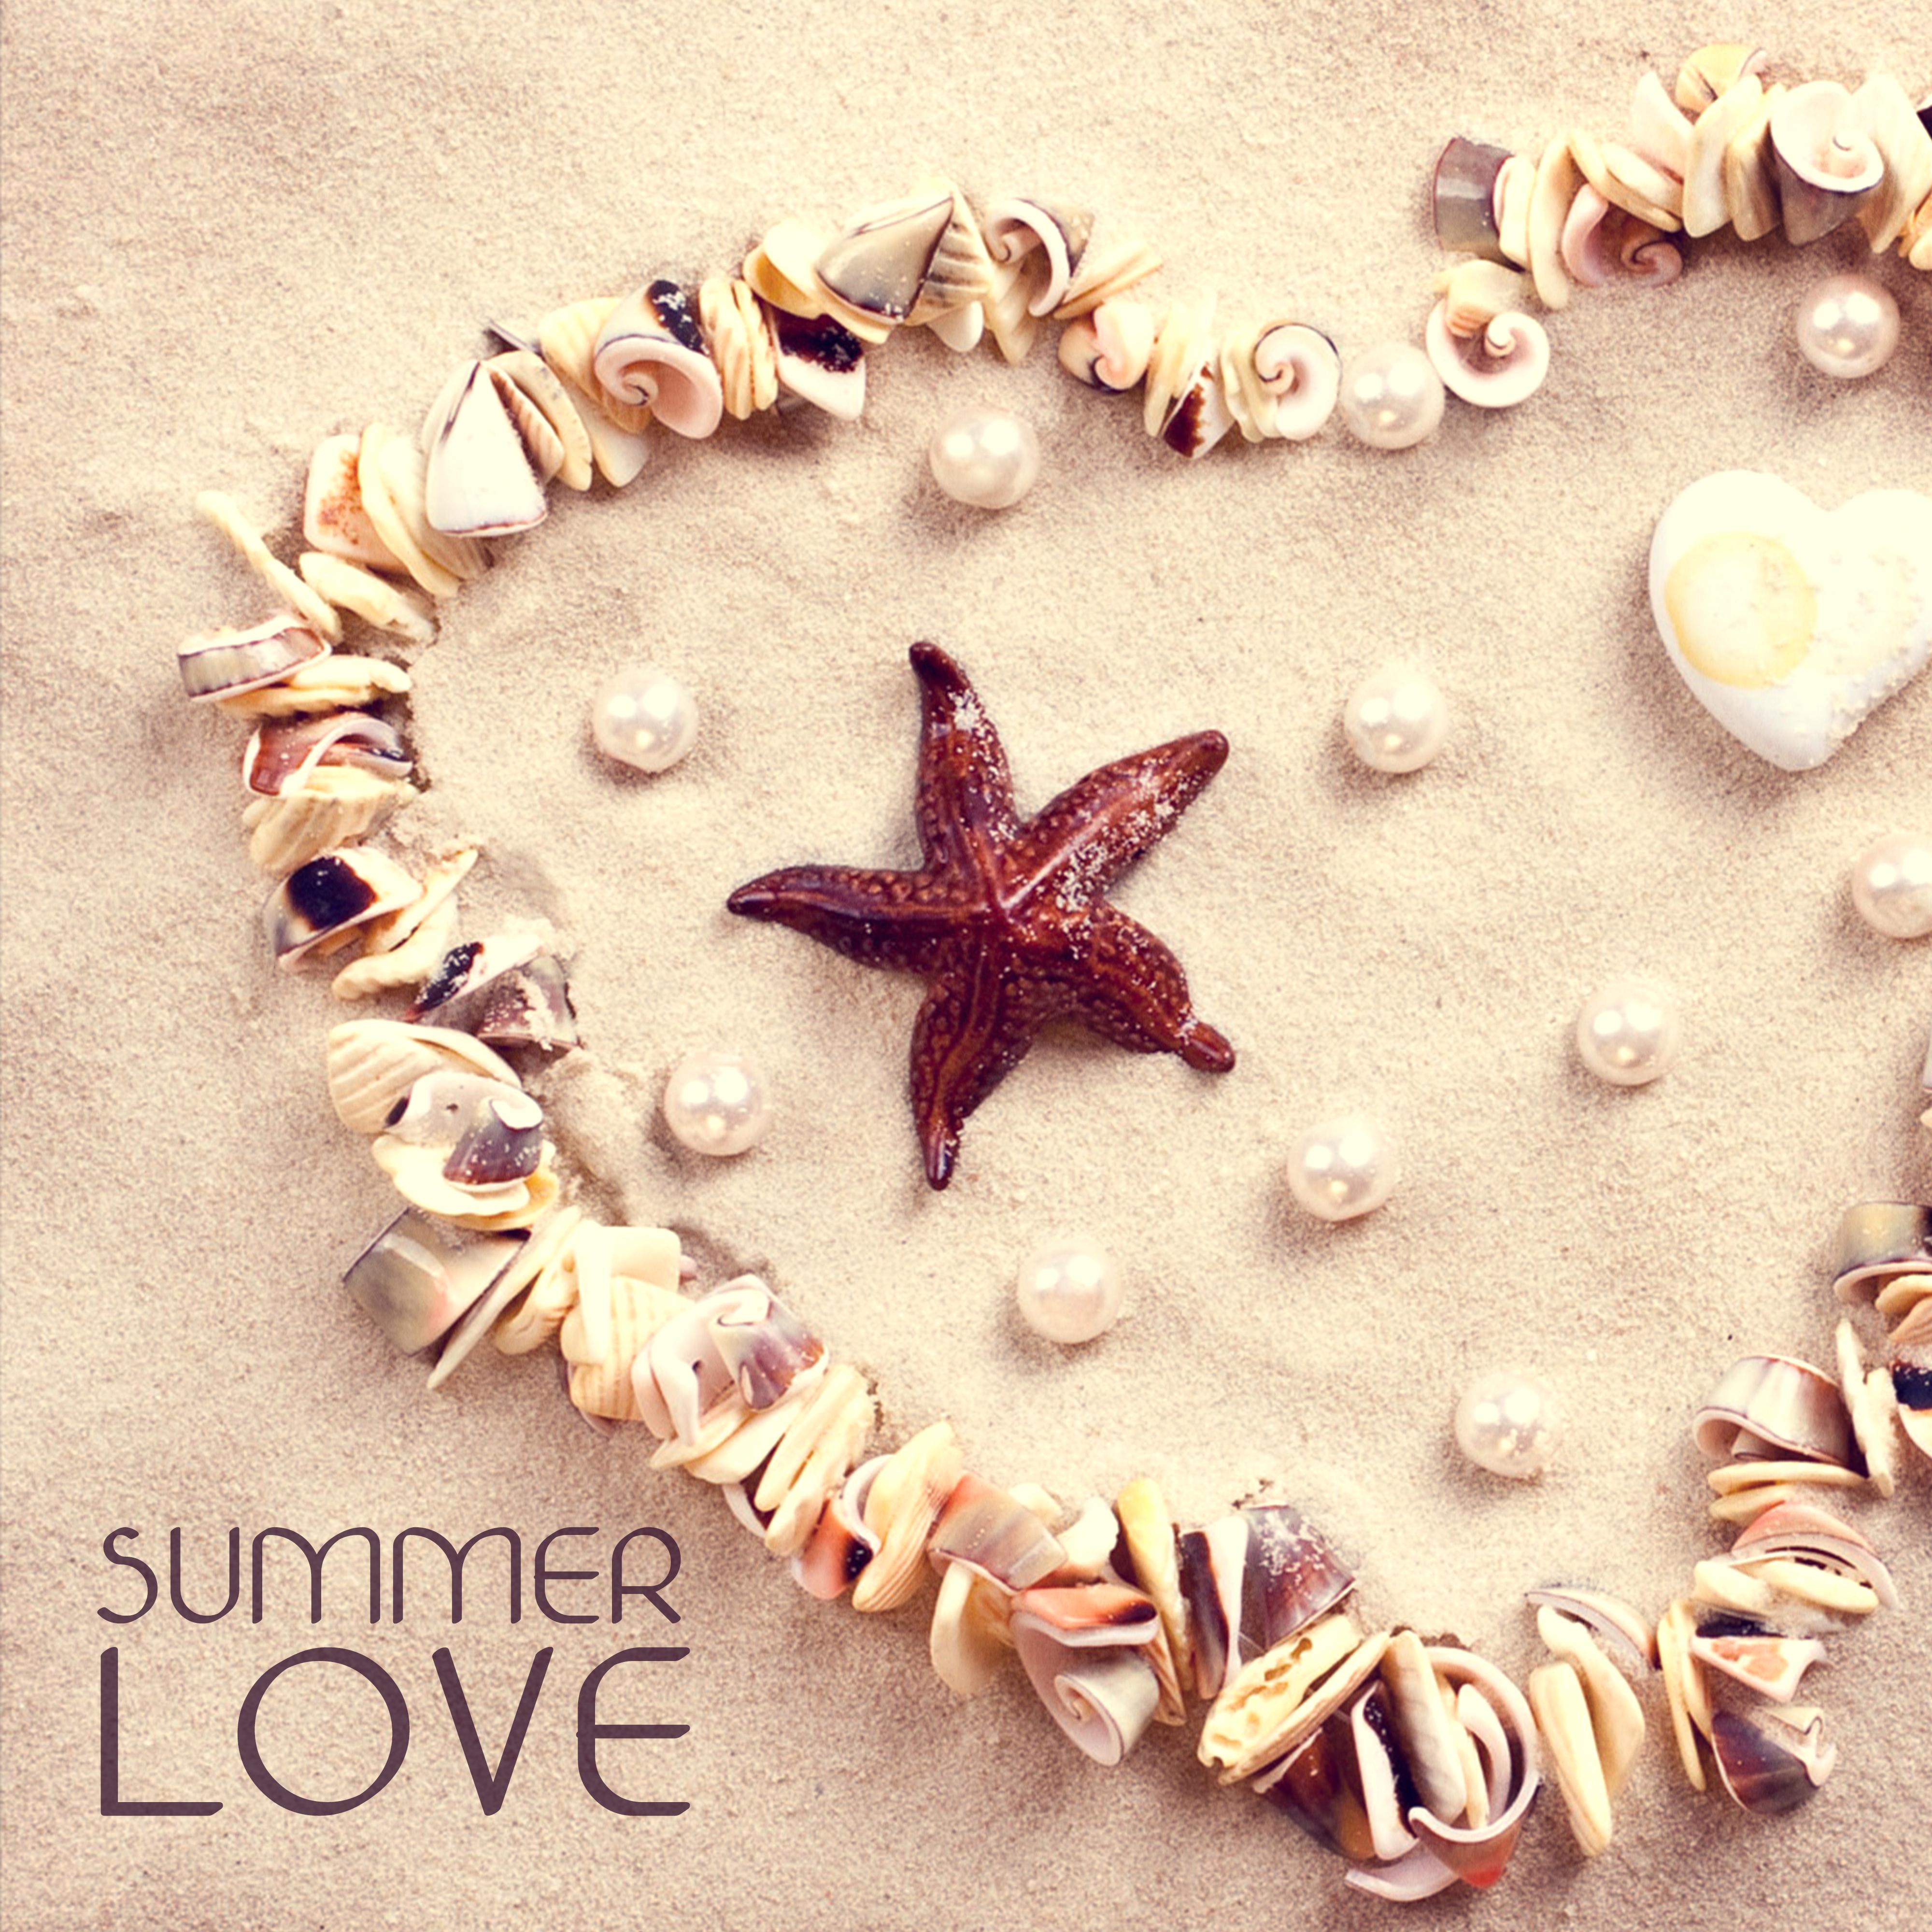 Summer Love – Electronic Music, Sensual Dance, Holiday Chill Out Music, Deep Massage, Erotic Lounge, Deep Relaxation